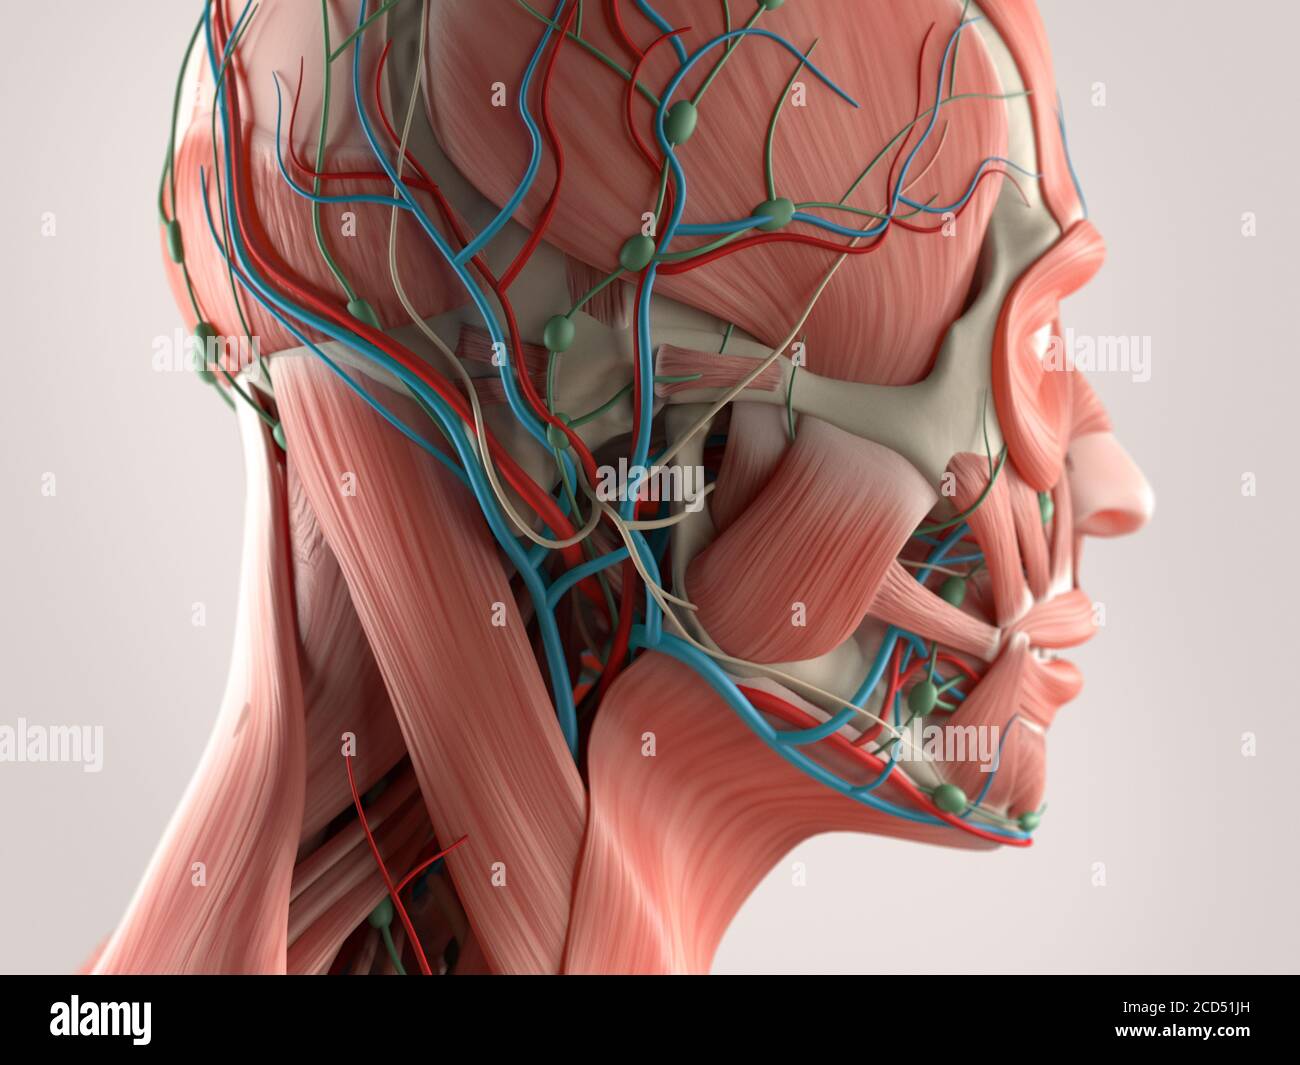 Human Anatomy Showing Face Head Shoulders And Back Muscular System Bone Structure And Vascular System Stock Photo Alamy